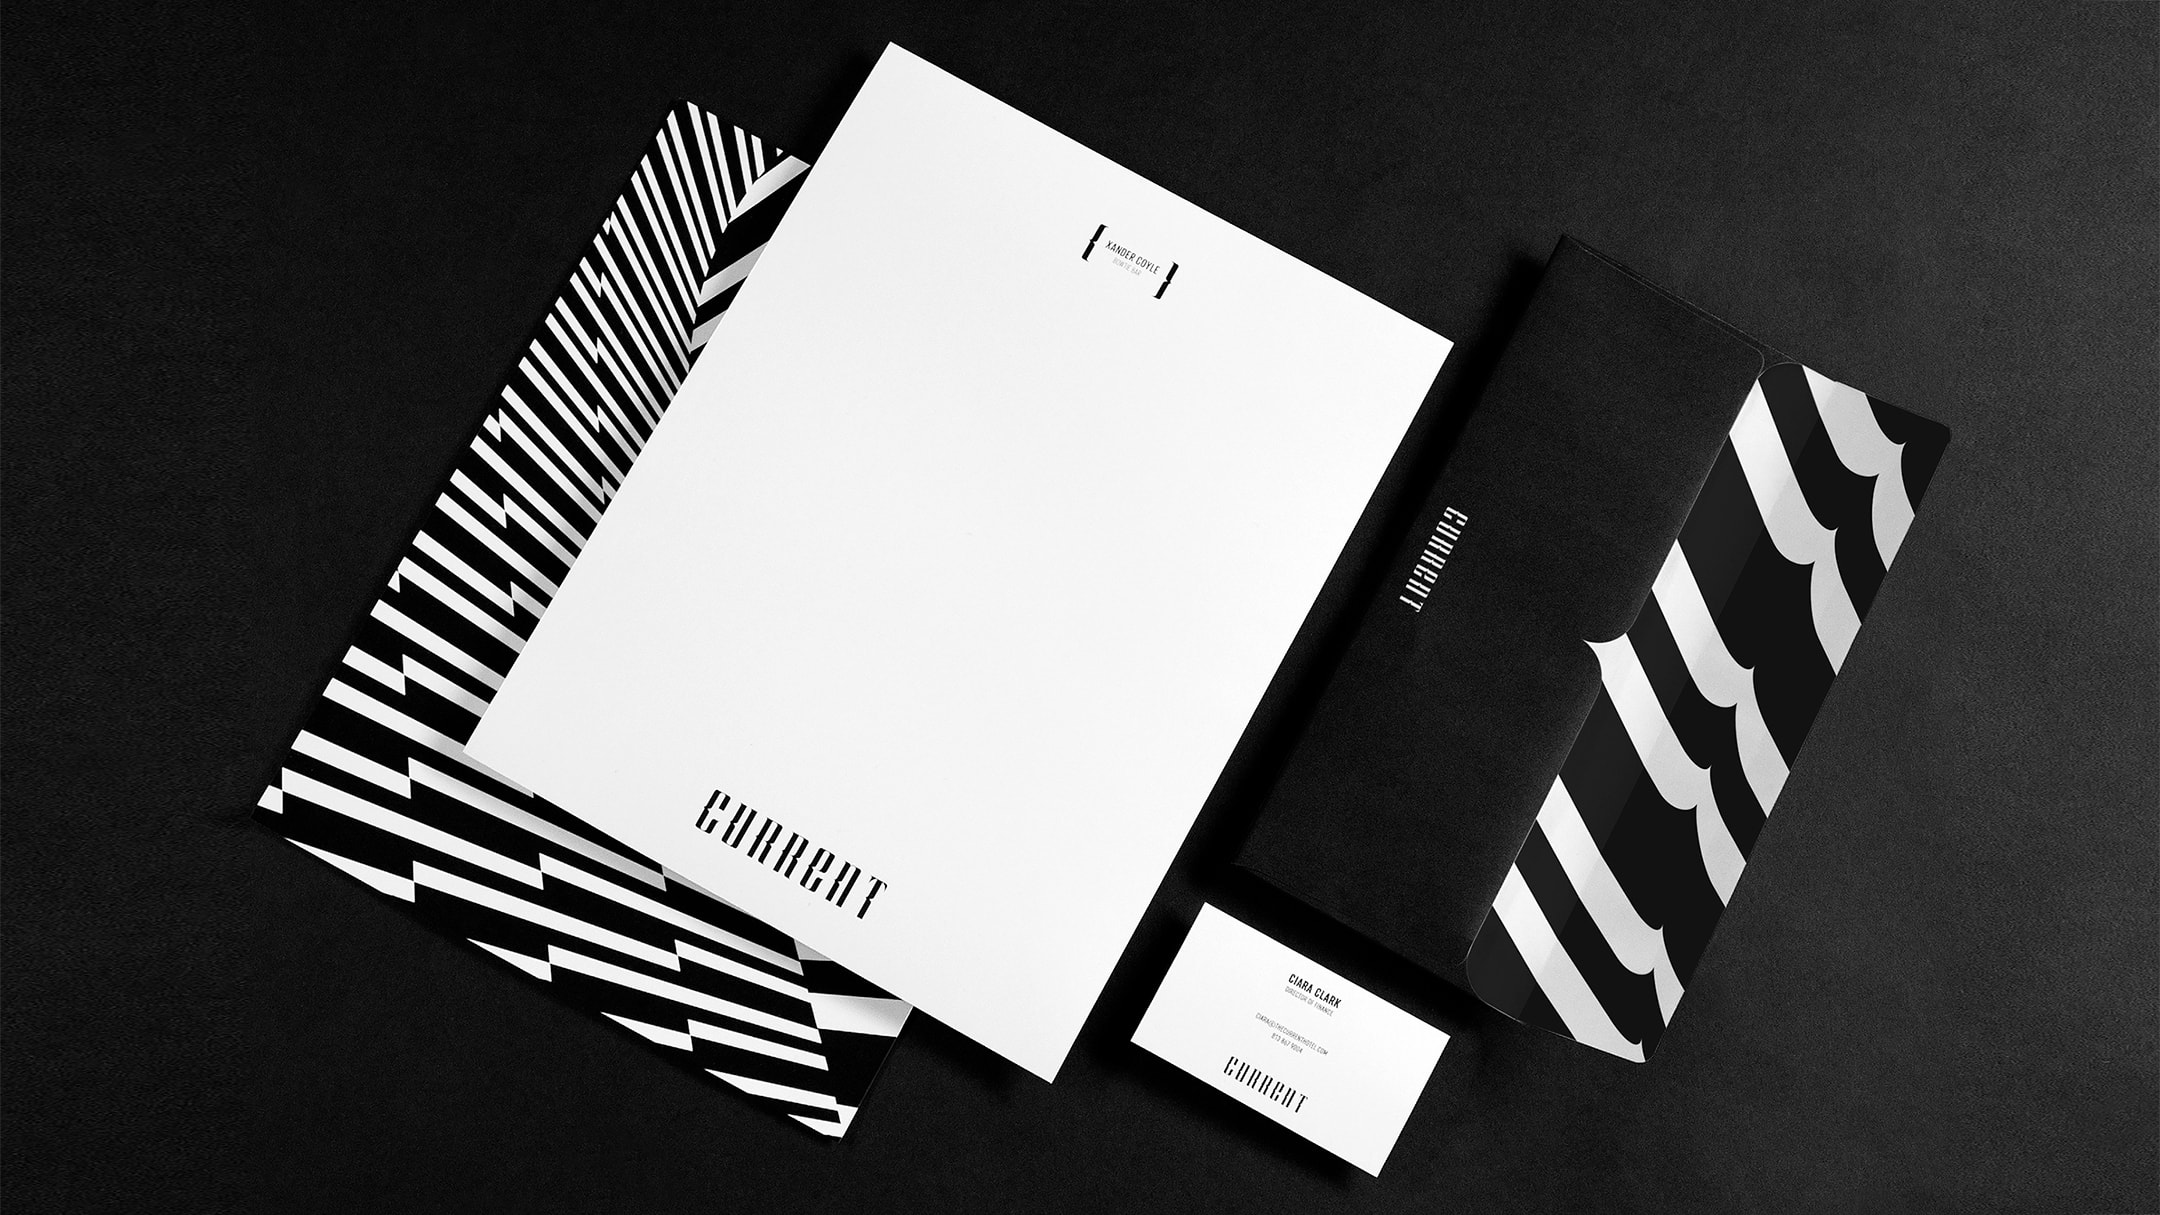 Current Hotel branded collateral